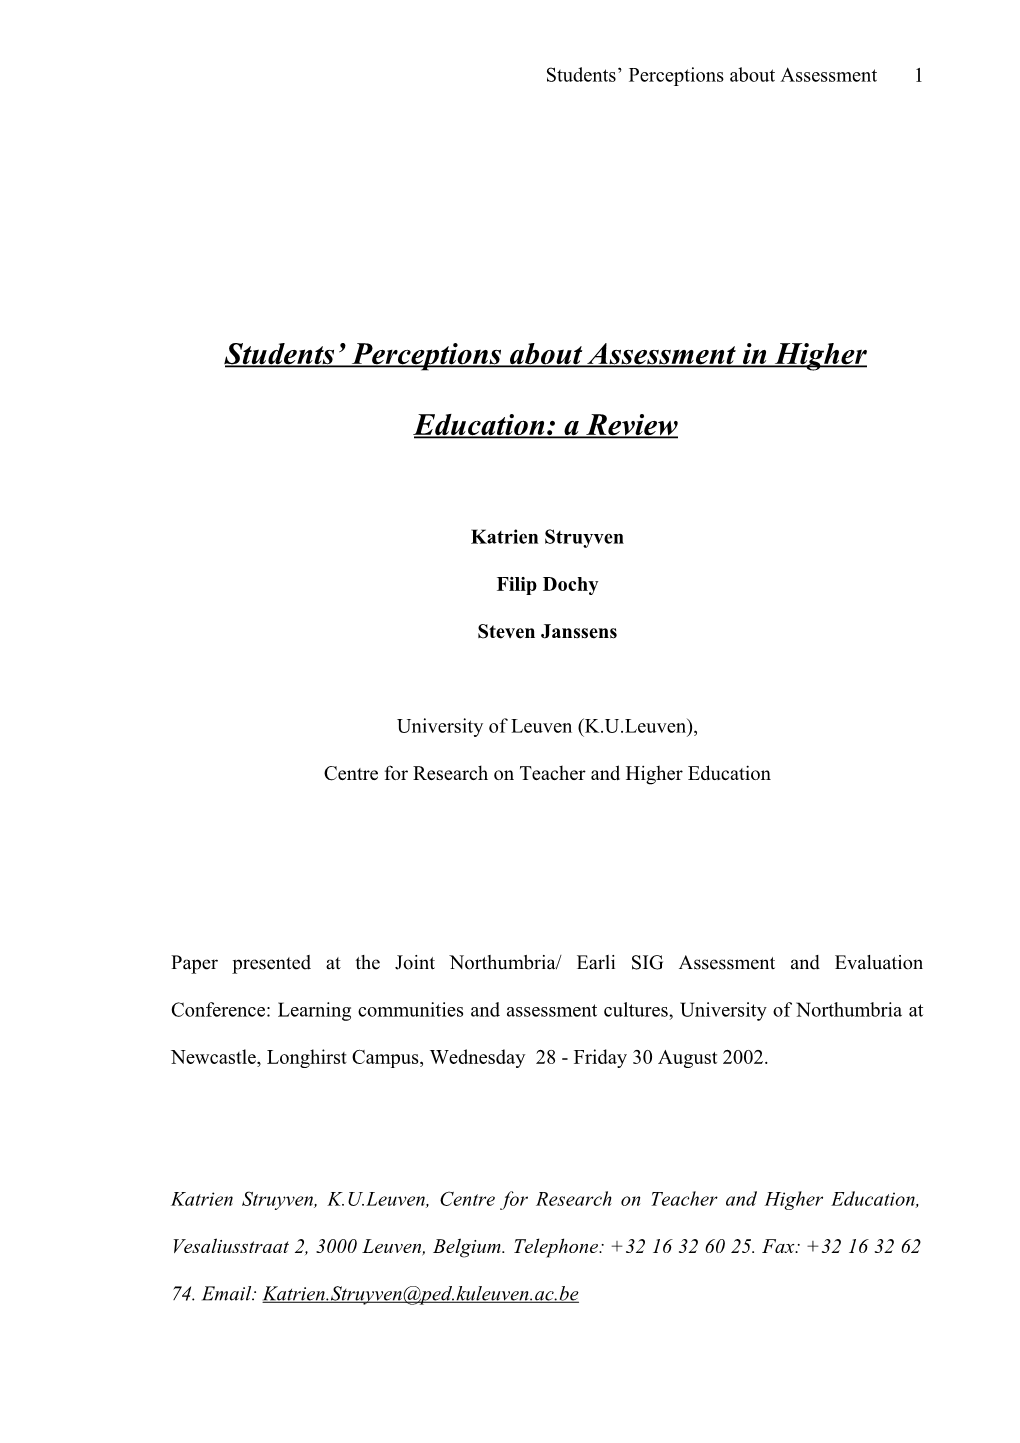 Students Perceptions About Assessment in Higher Education: a Review